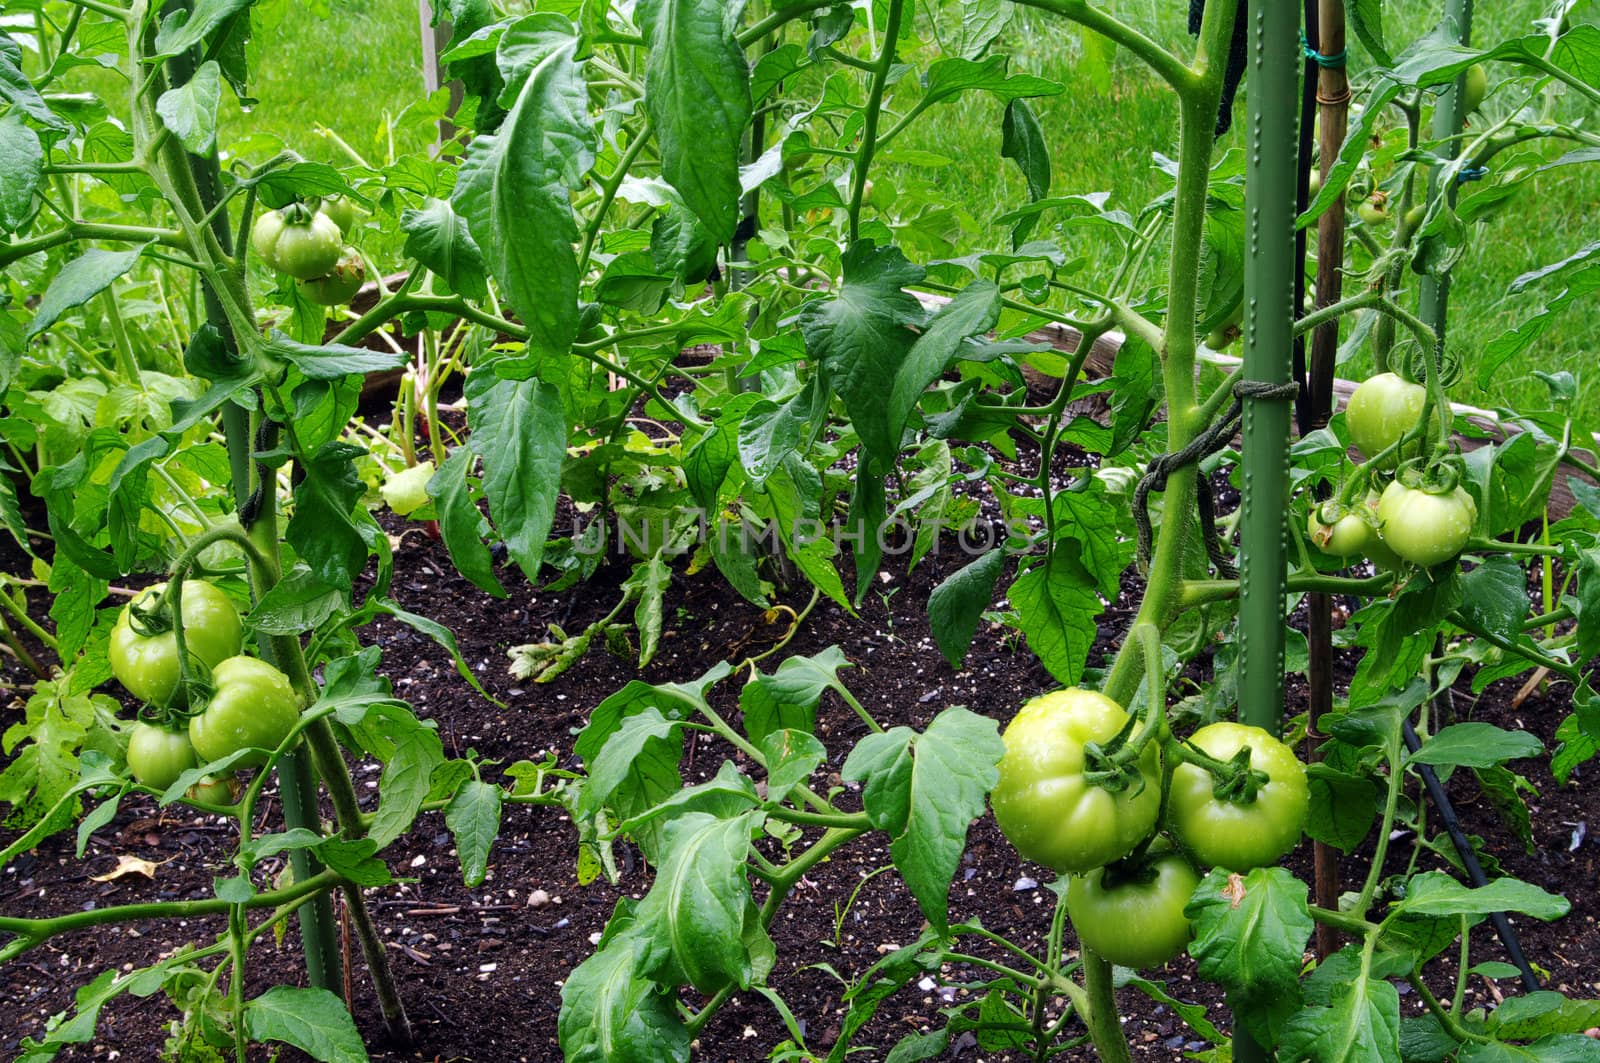 Green Tomatoes on the vine by edcorey